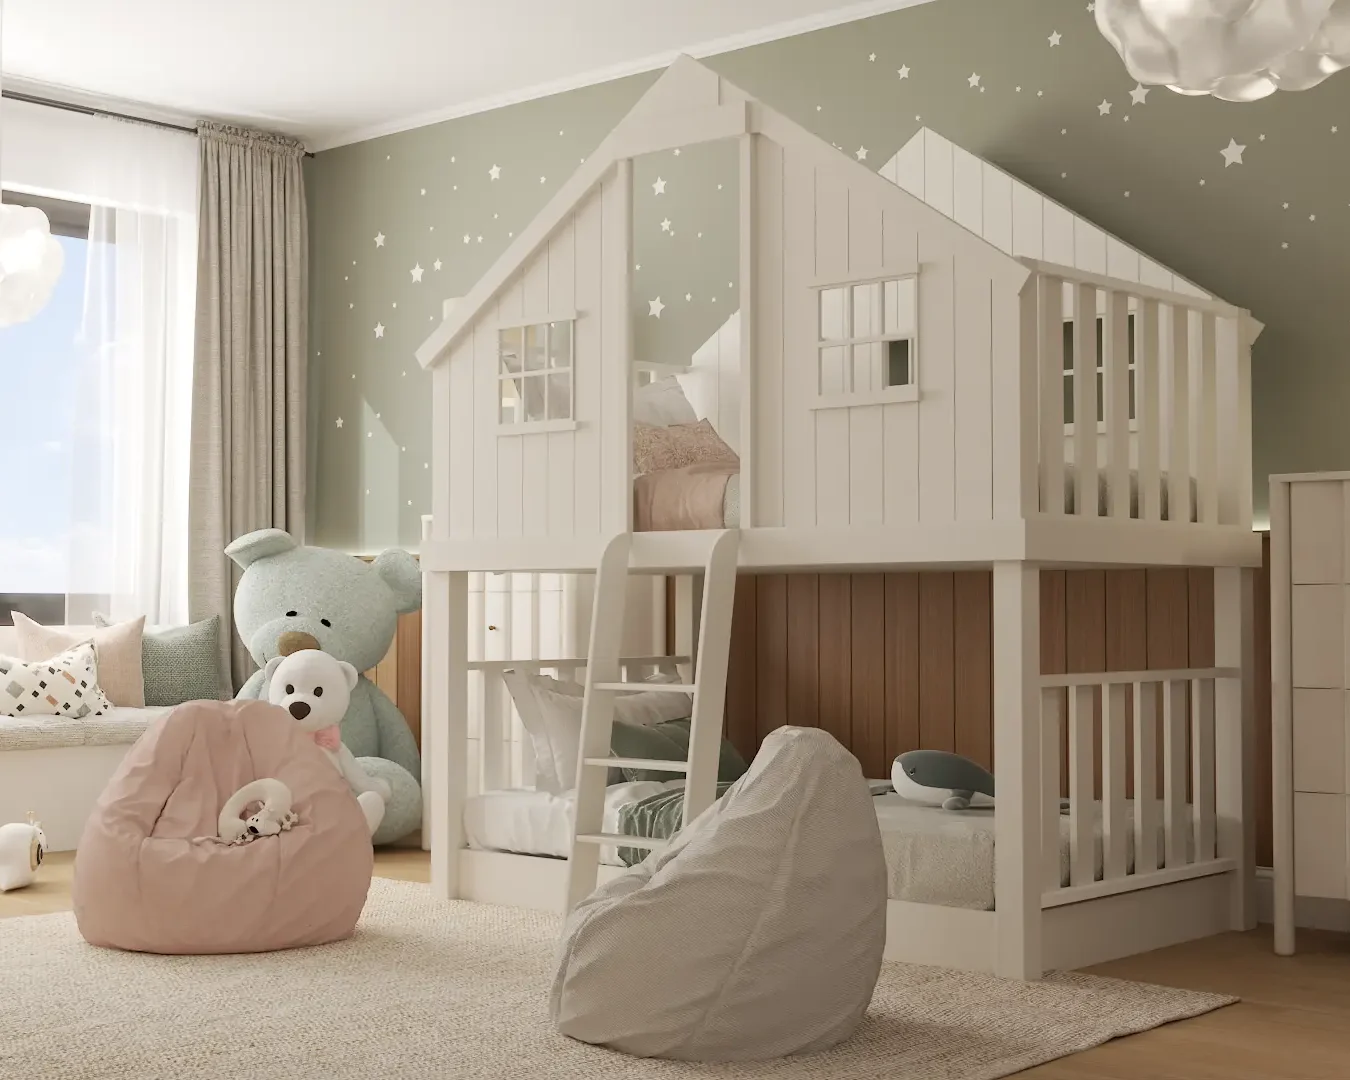 Cozy children's loft bedroom with a house-shaped bed under a starry ceiling, offering a tranquil and imaginative space, designed by Debora, an online interior design service based in New York City.